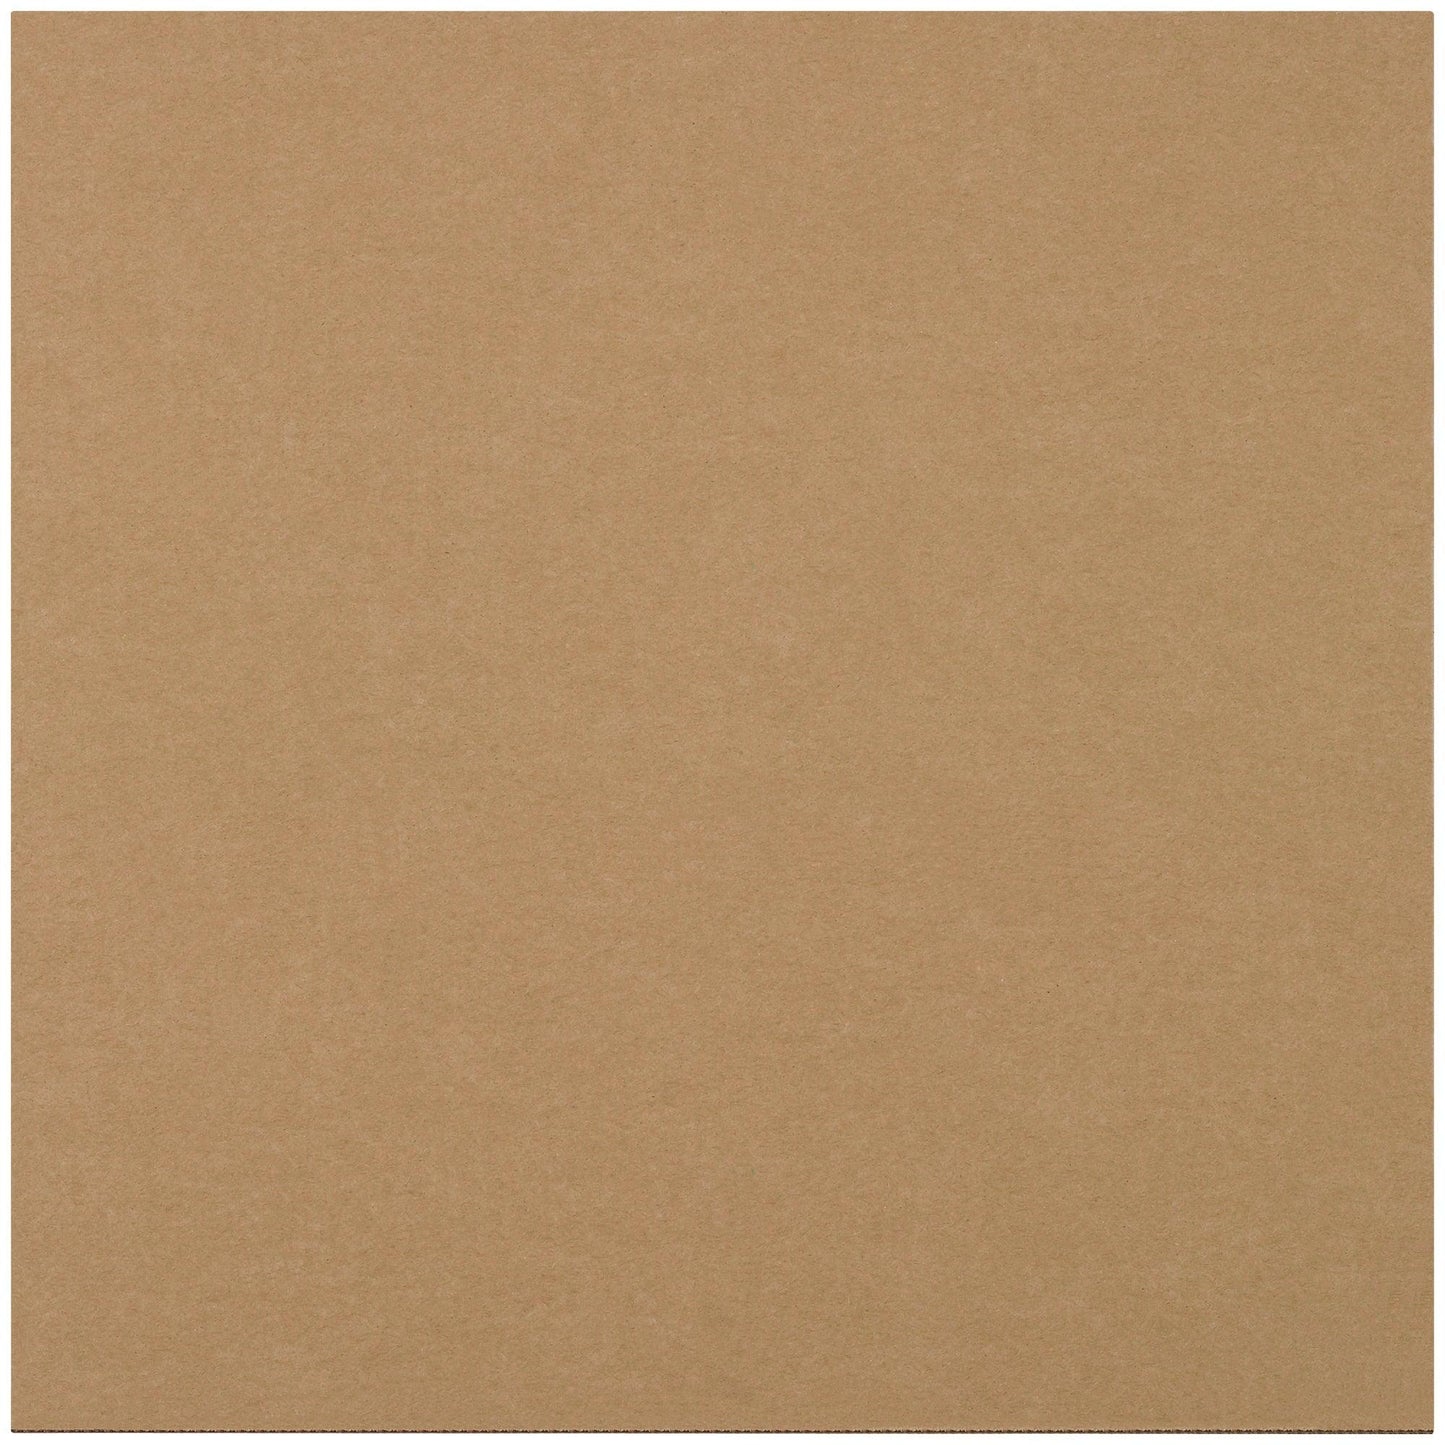 17 7/8 x 17 7/8" Corrugated Layer Pads - SP17